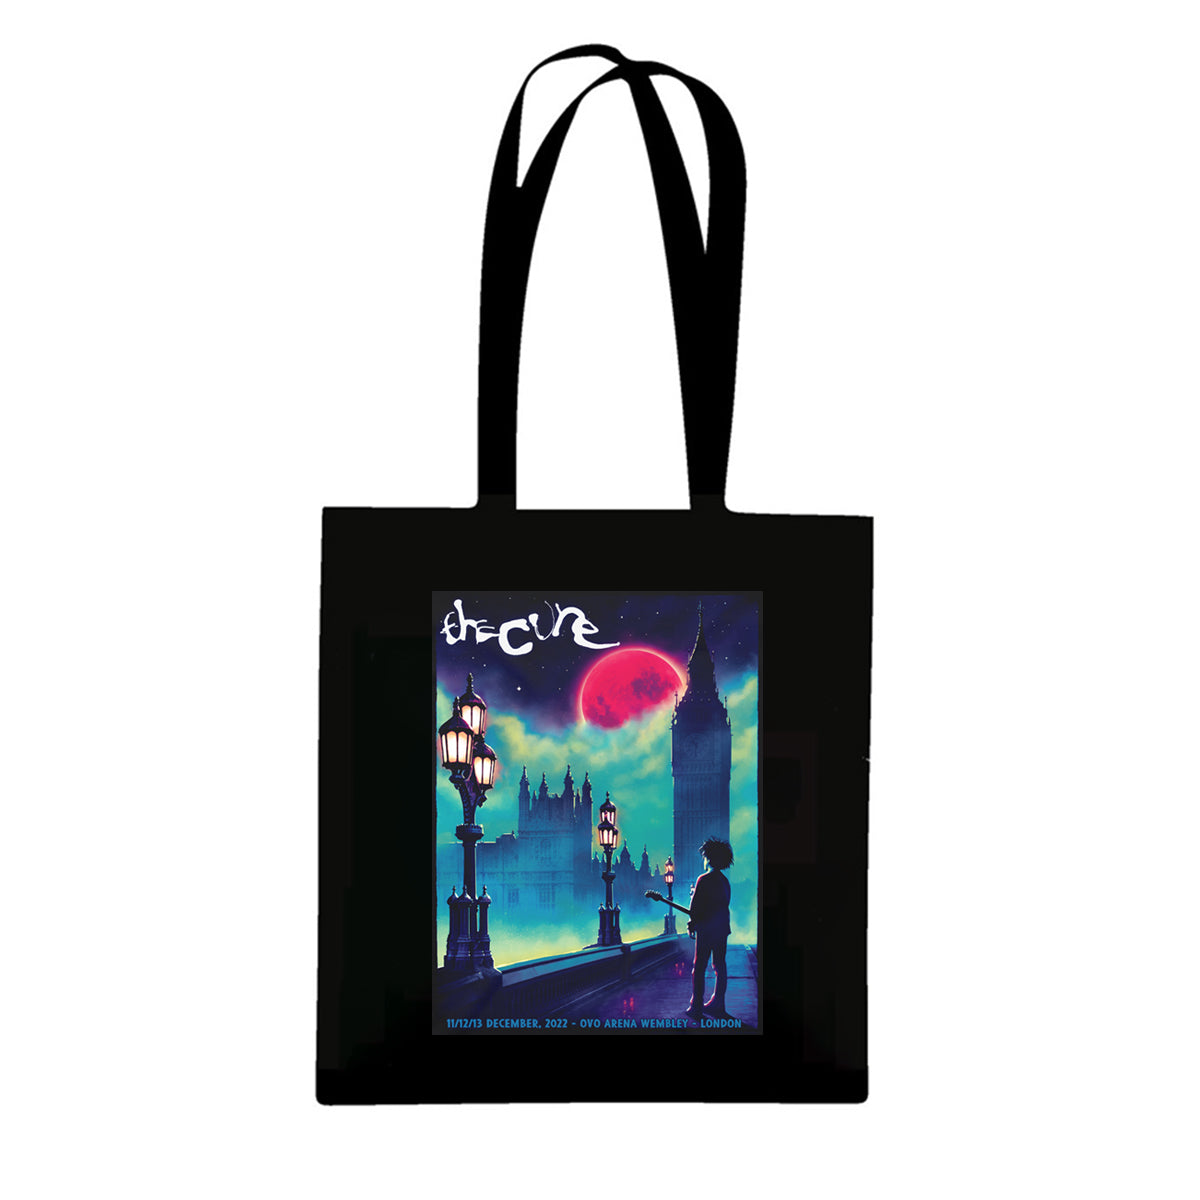 LONDON EVENT RED MOON TOTE BAG